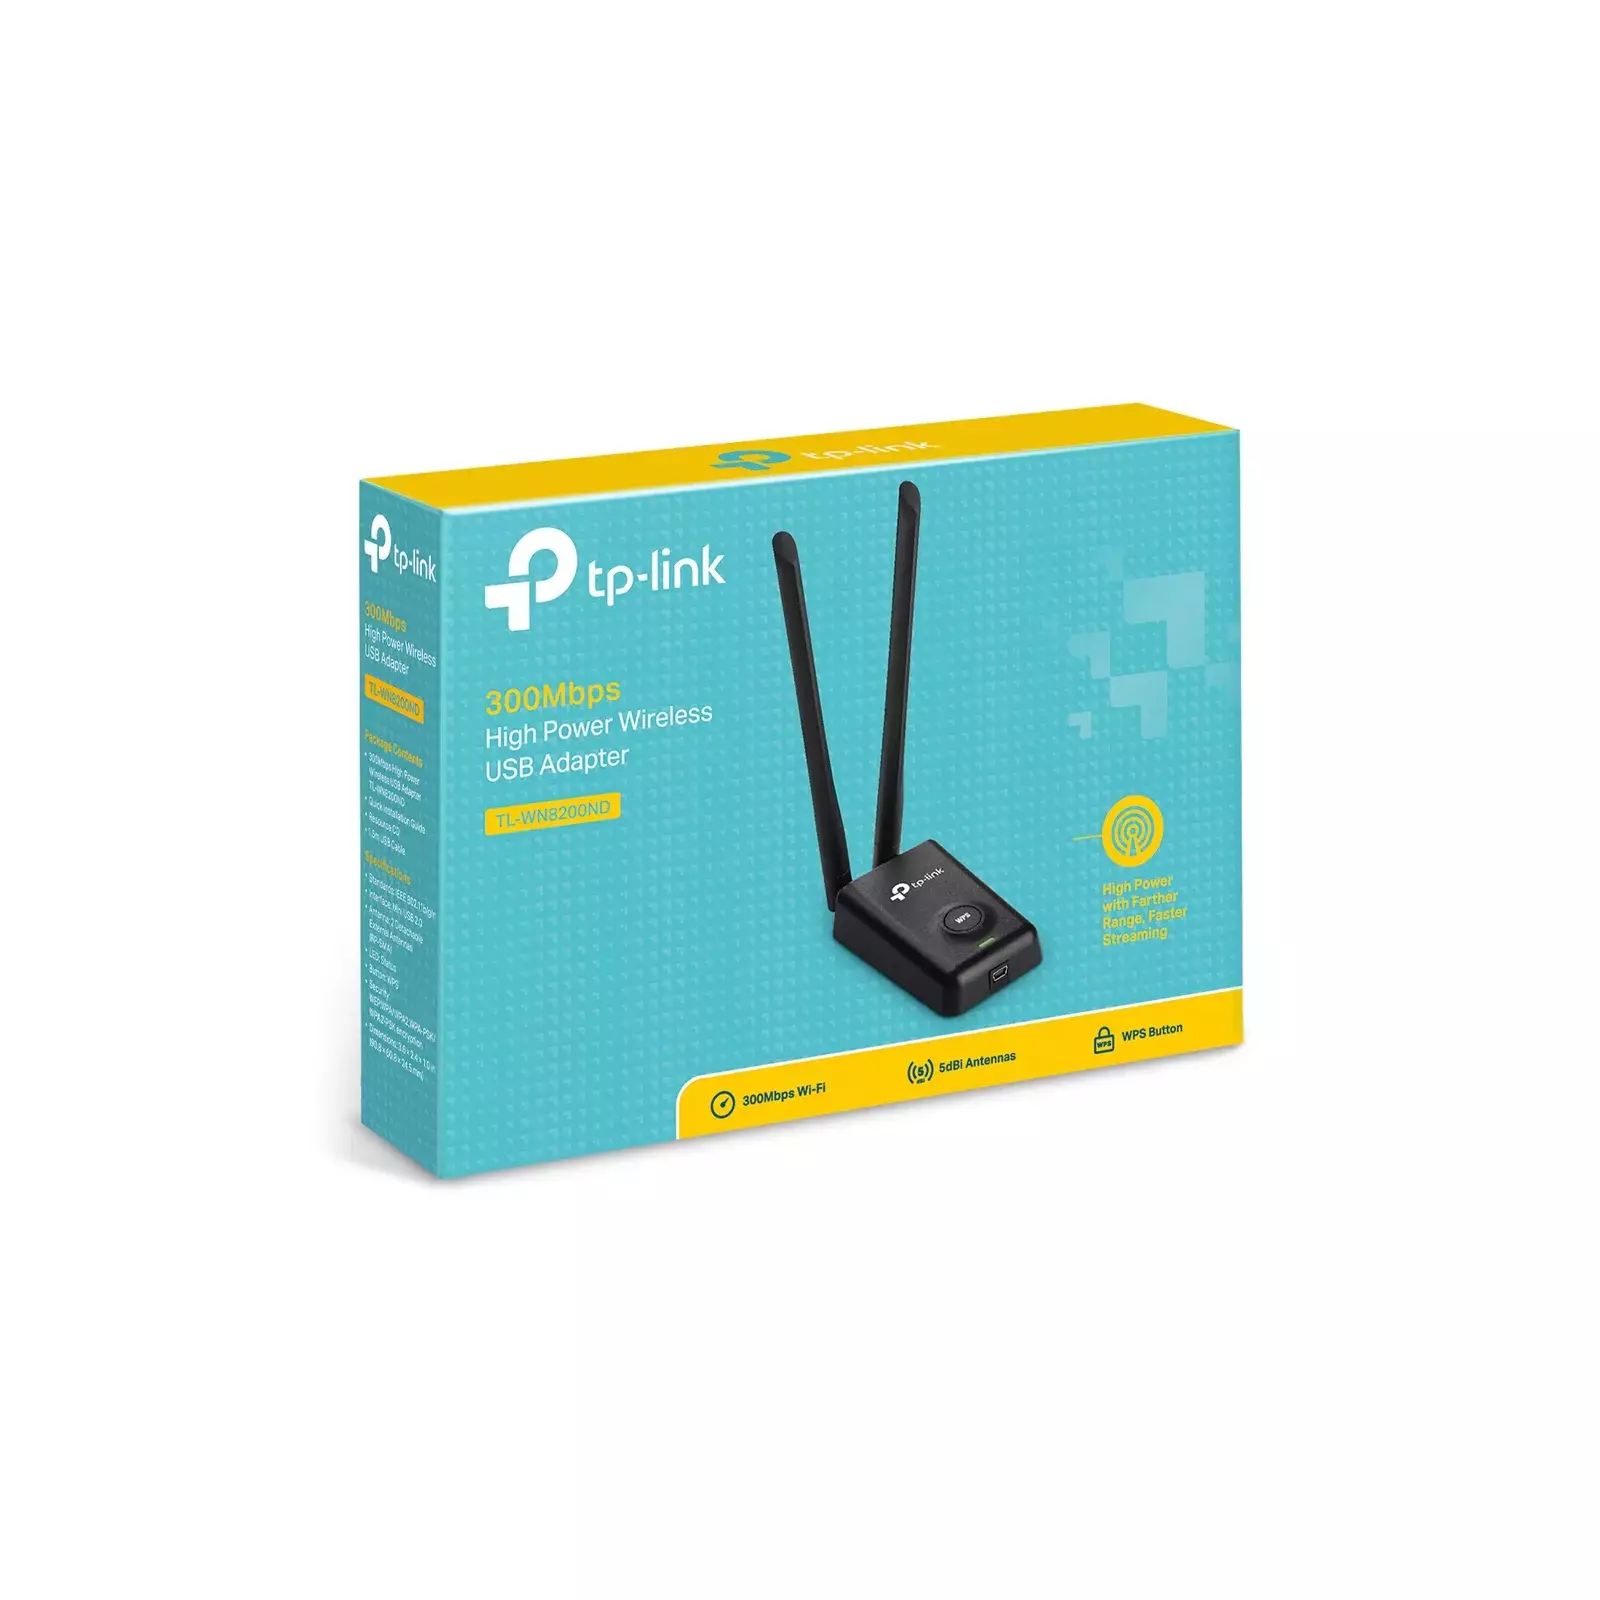 TP-LINK TL-WN8200ND Photo 4